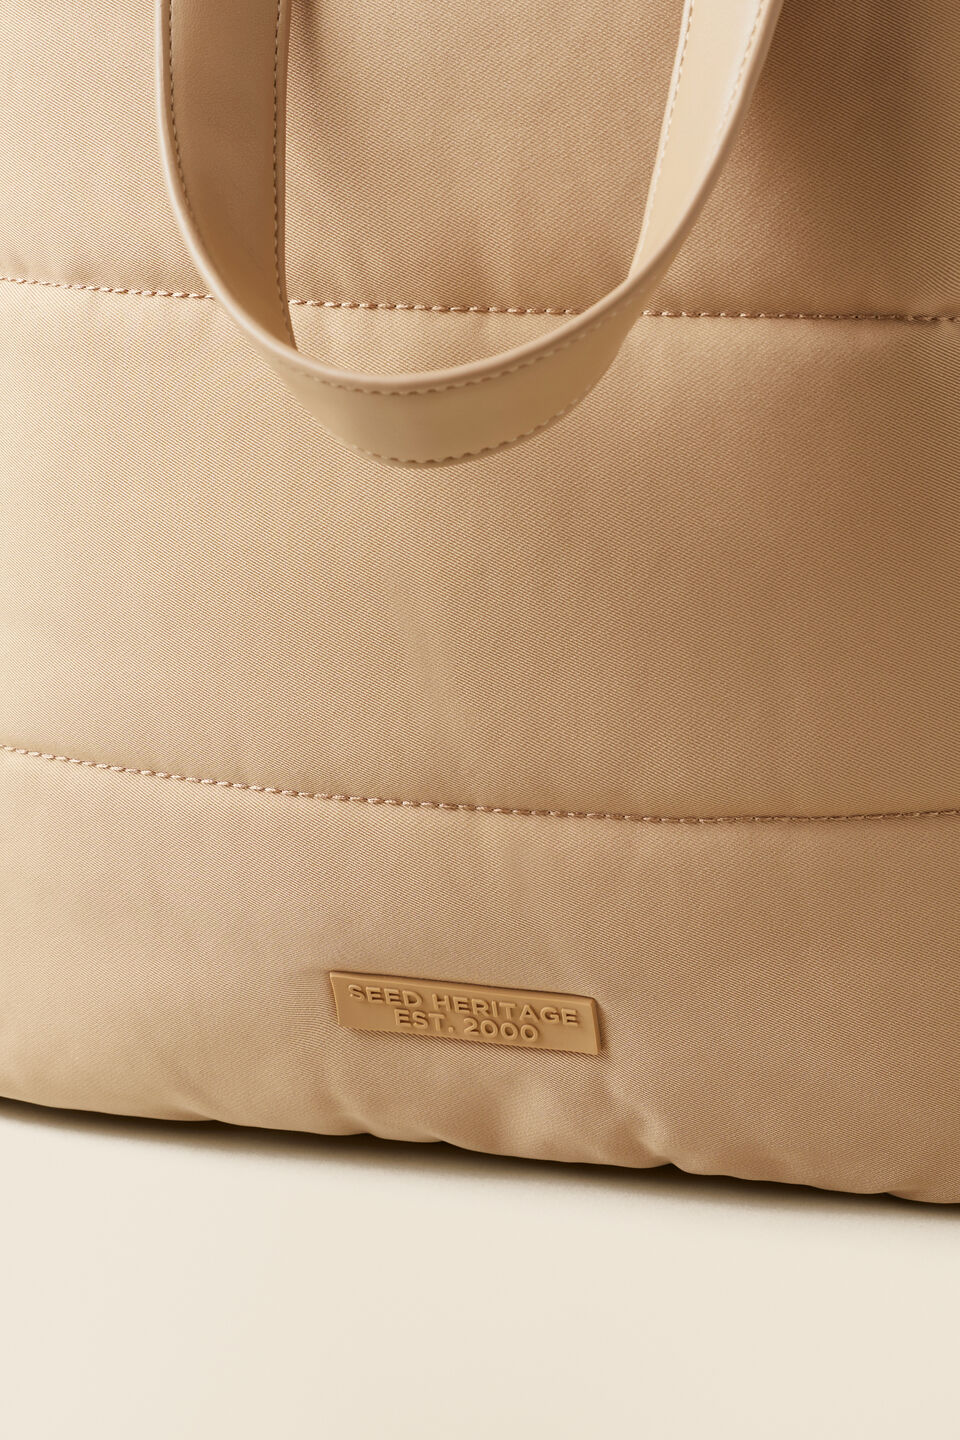 Quilted Leisure Tote  Champagne Beige